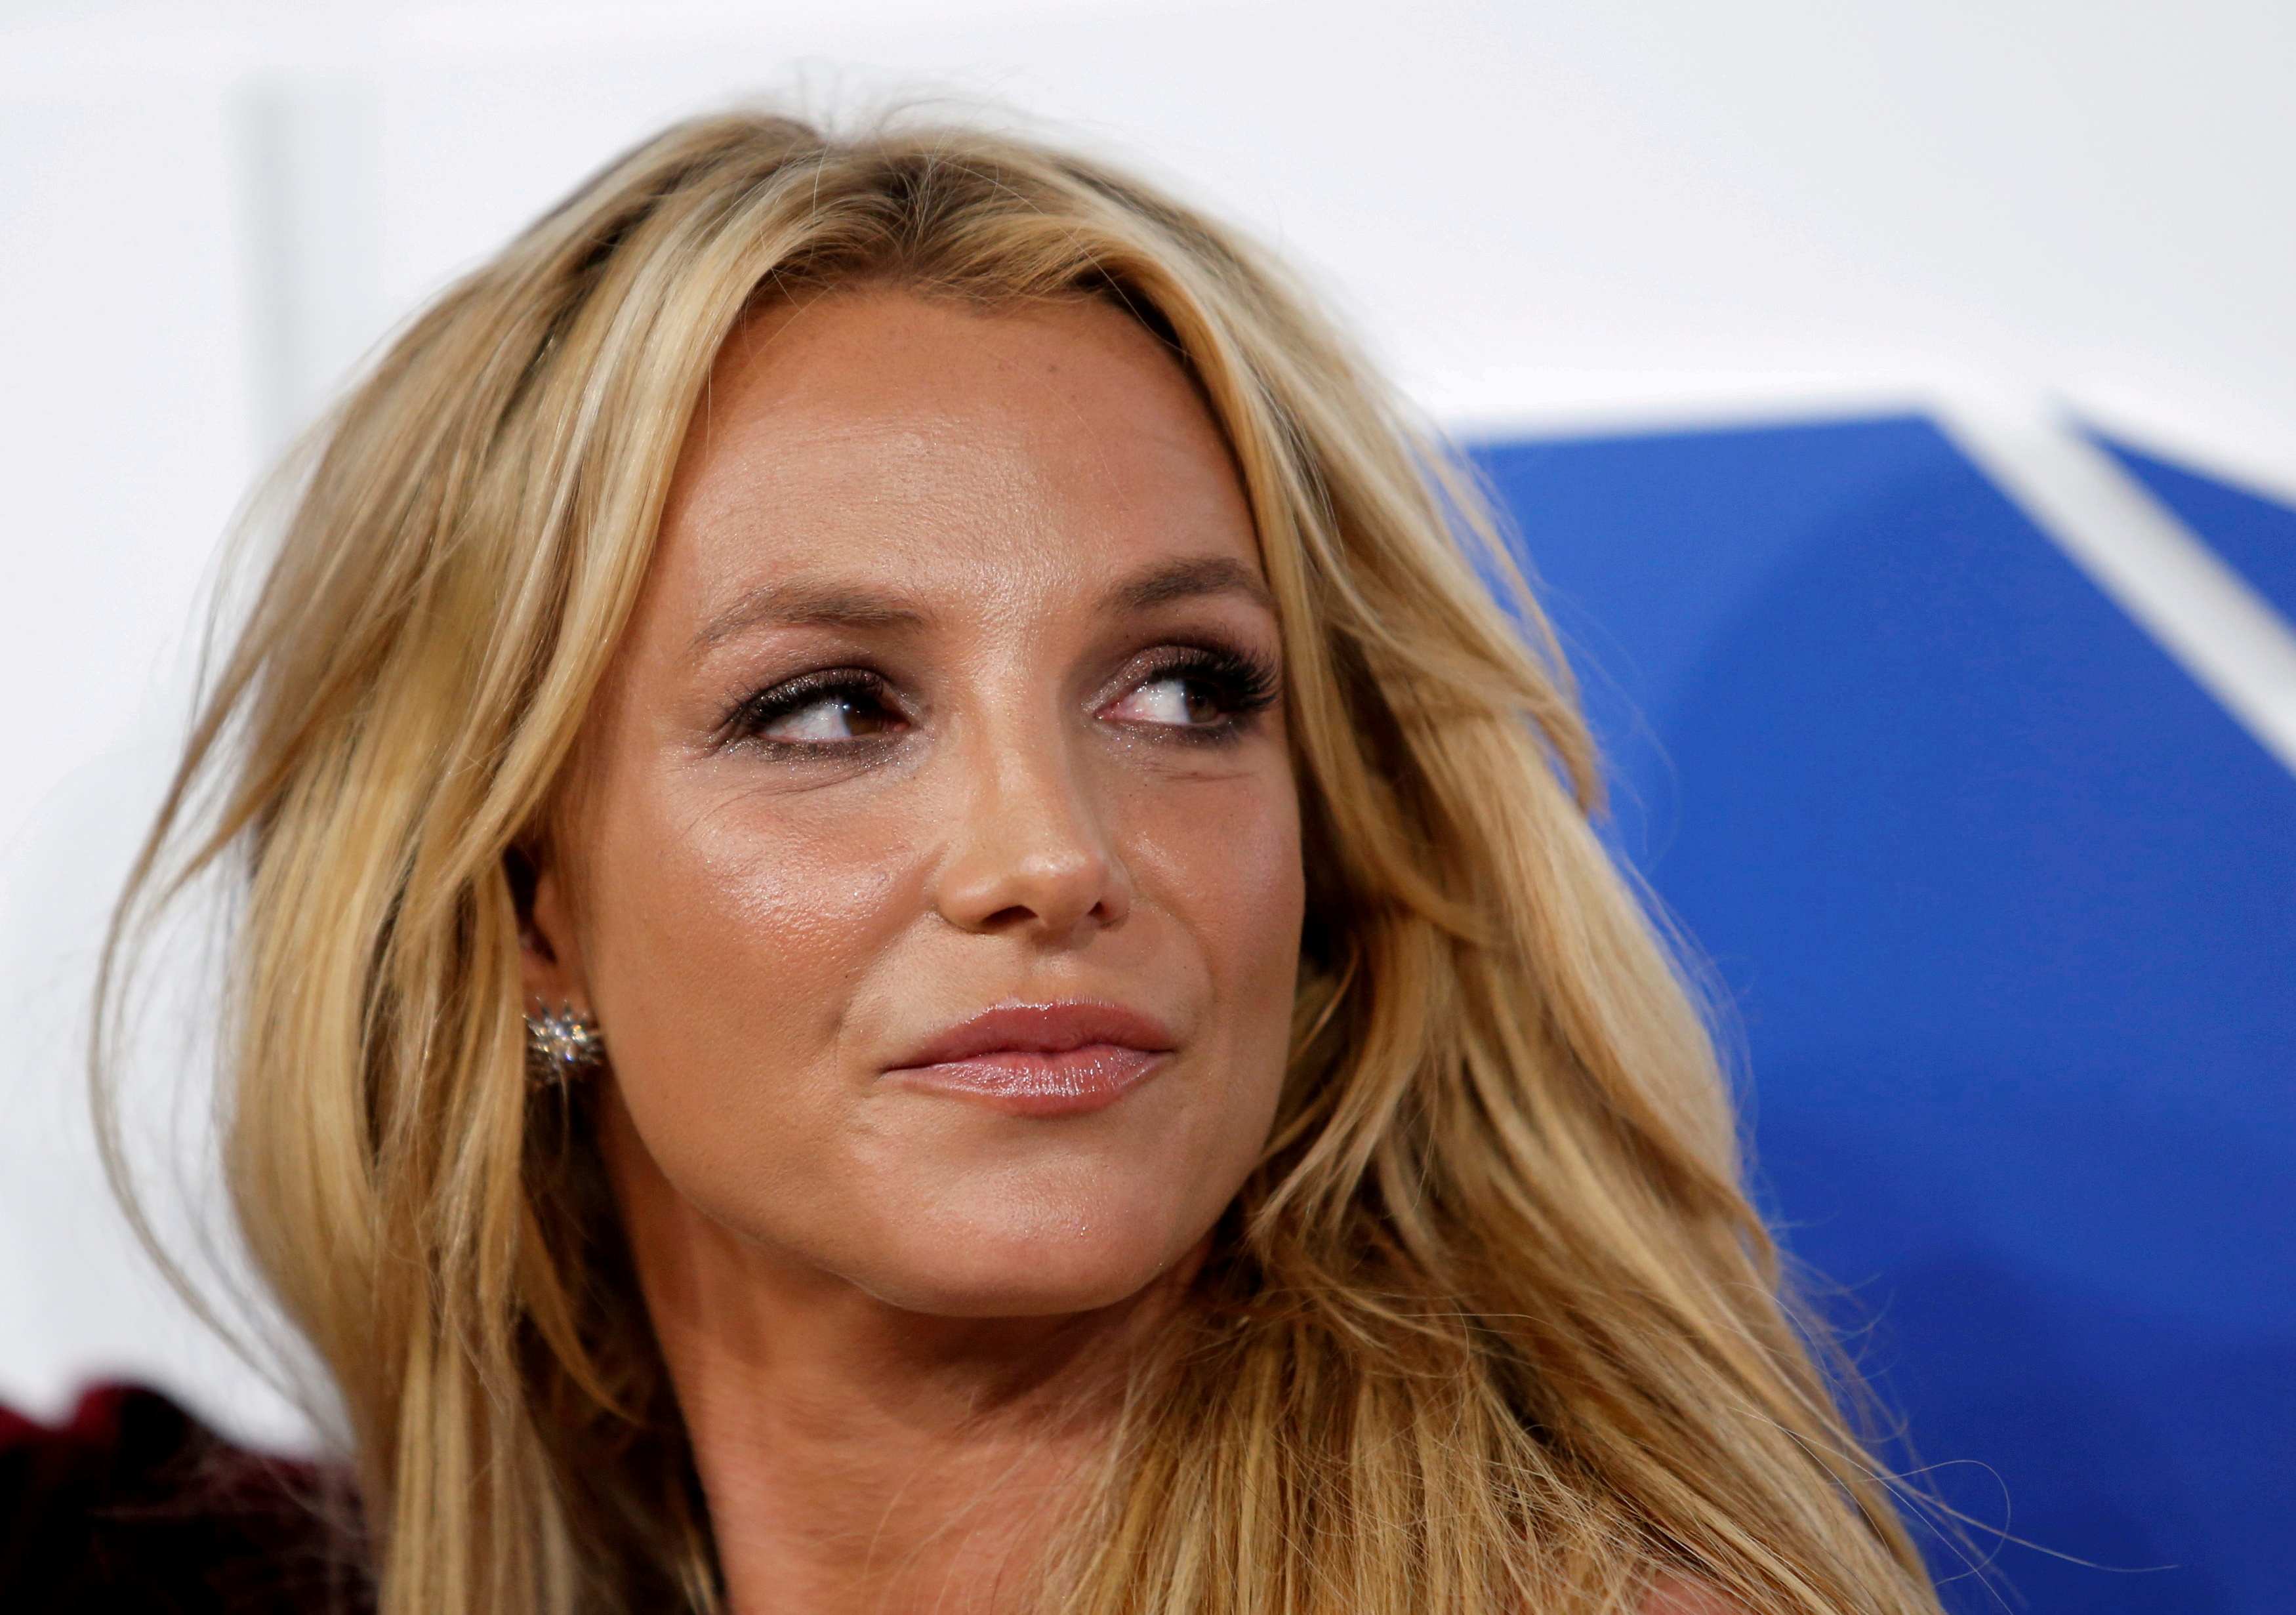 Britney Spears Calls Recent Documentaries About Her Hypocritical Reuters 6641